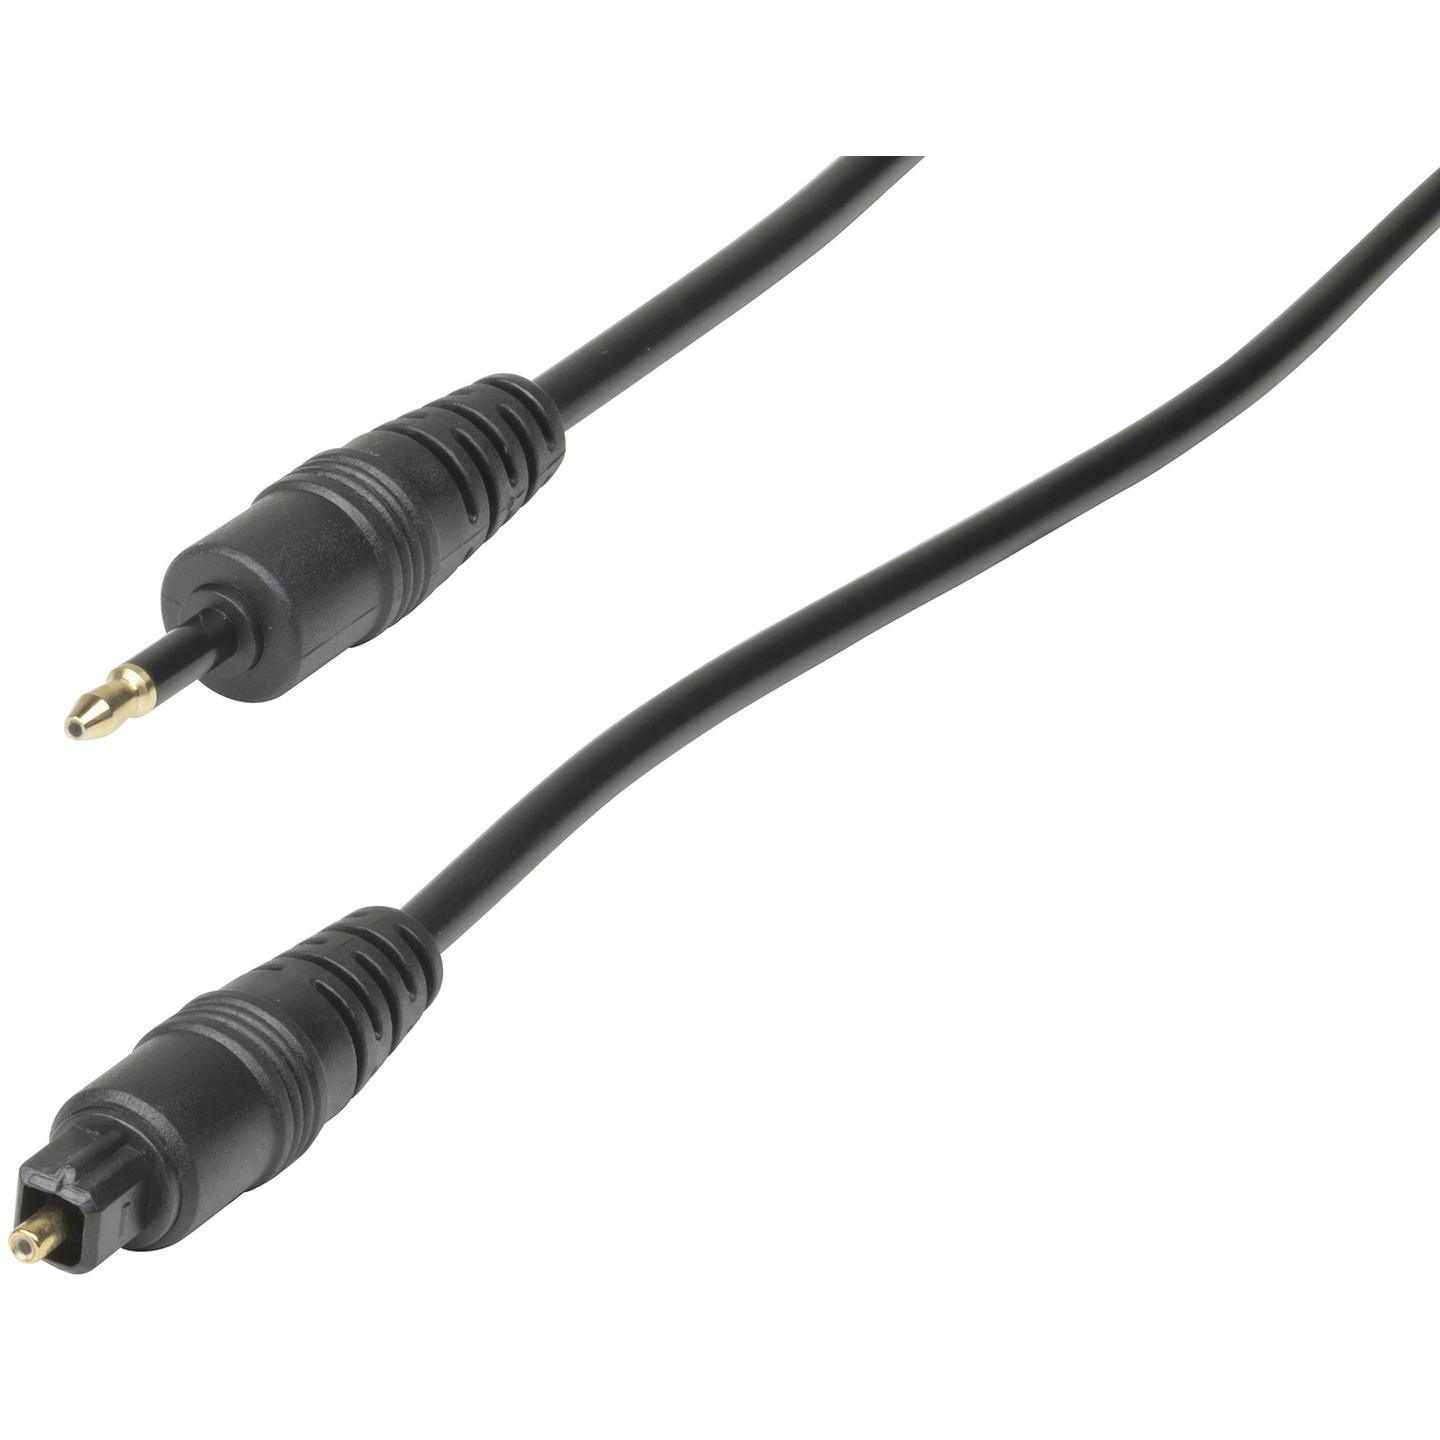 1m Mini 3.5mm TOSLINK to TOSLINK Optical Cable